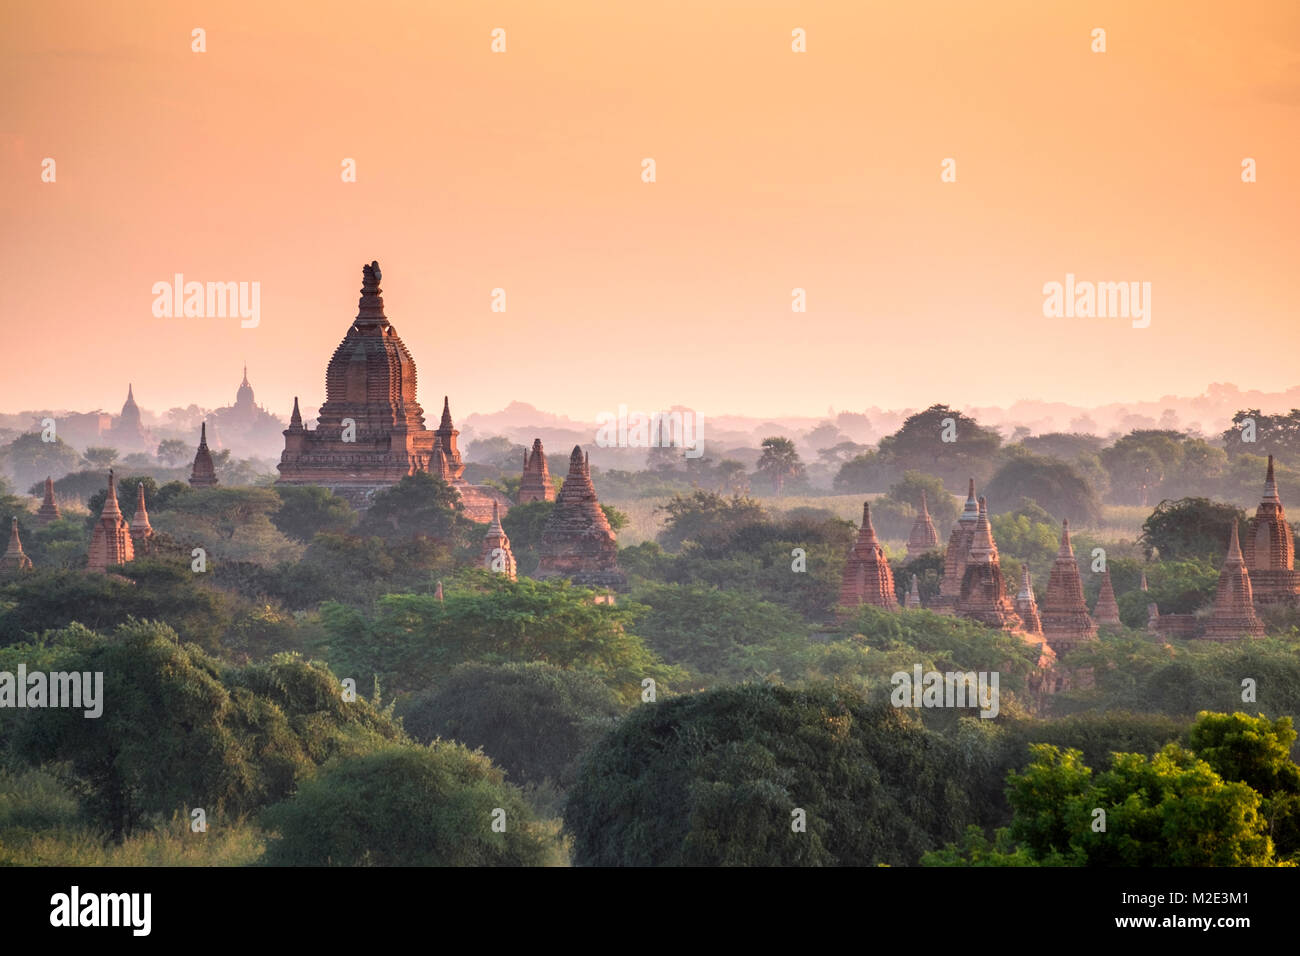 Pagodas in landscape Stock Photo